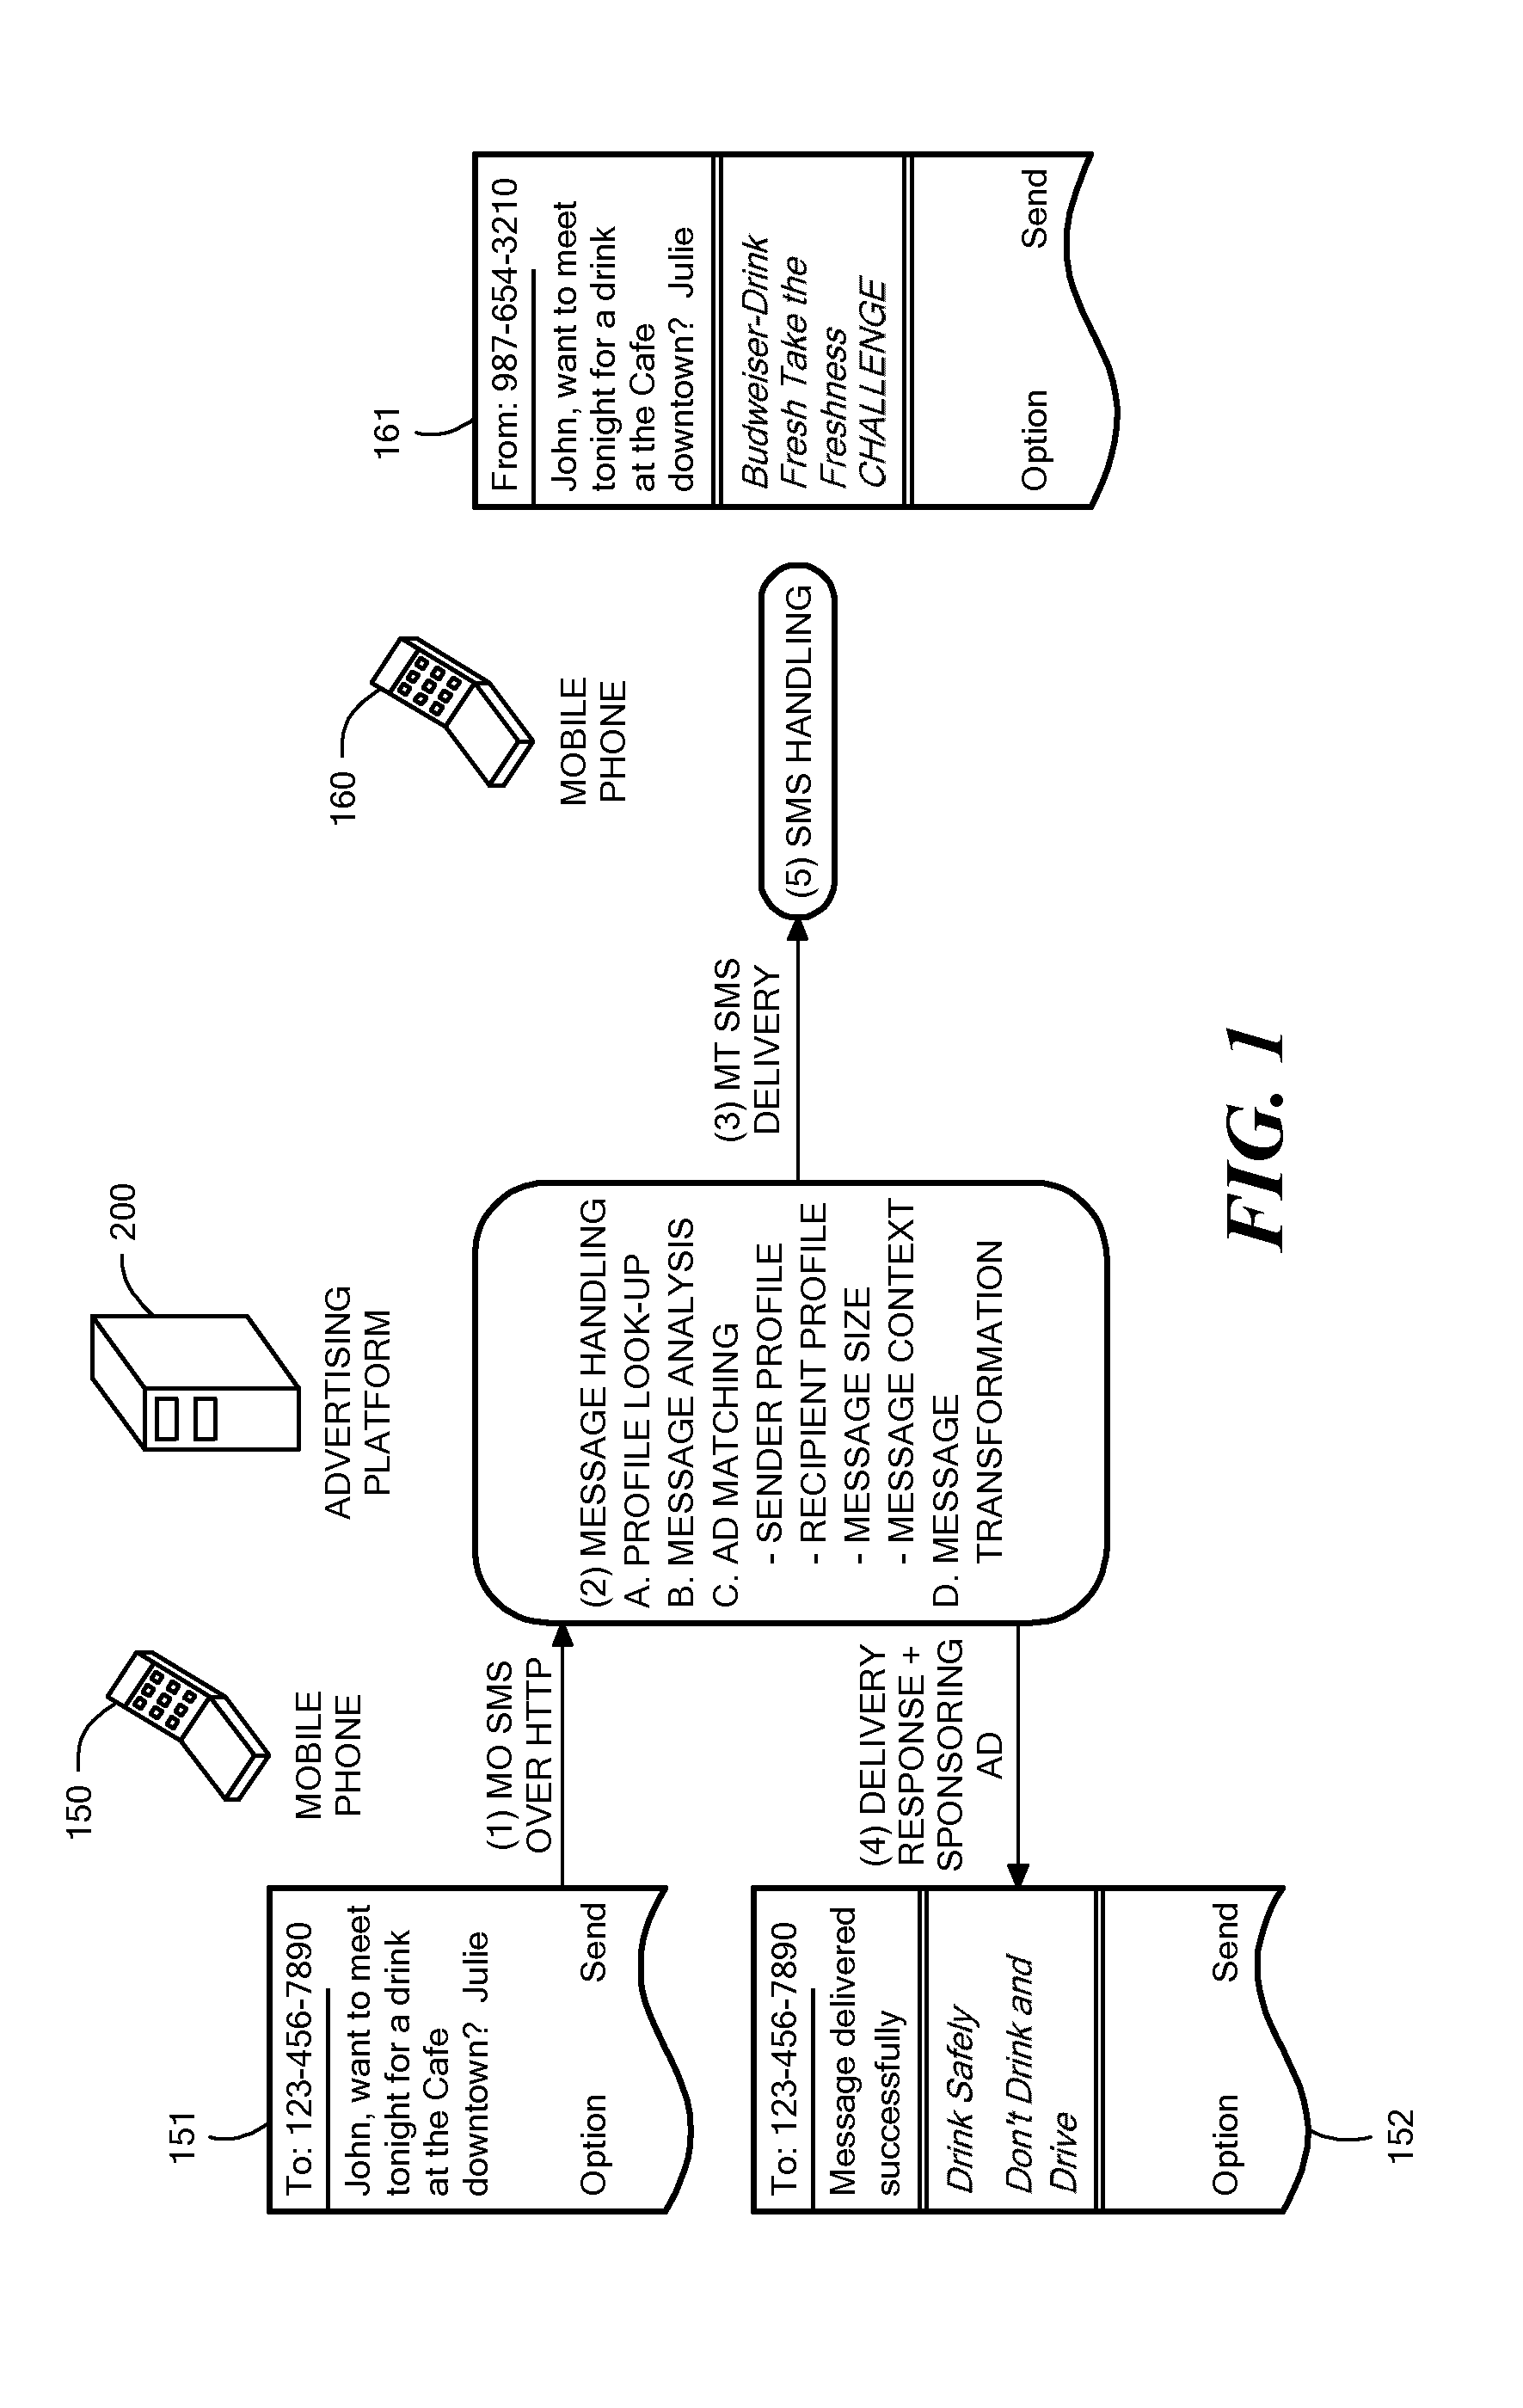 Method and System for Wireless Message-Based Advertising